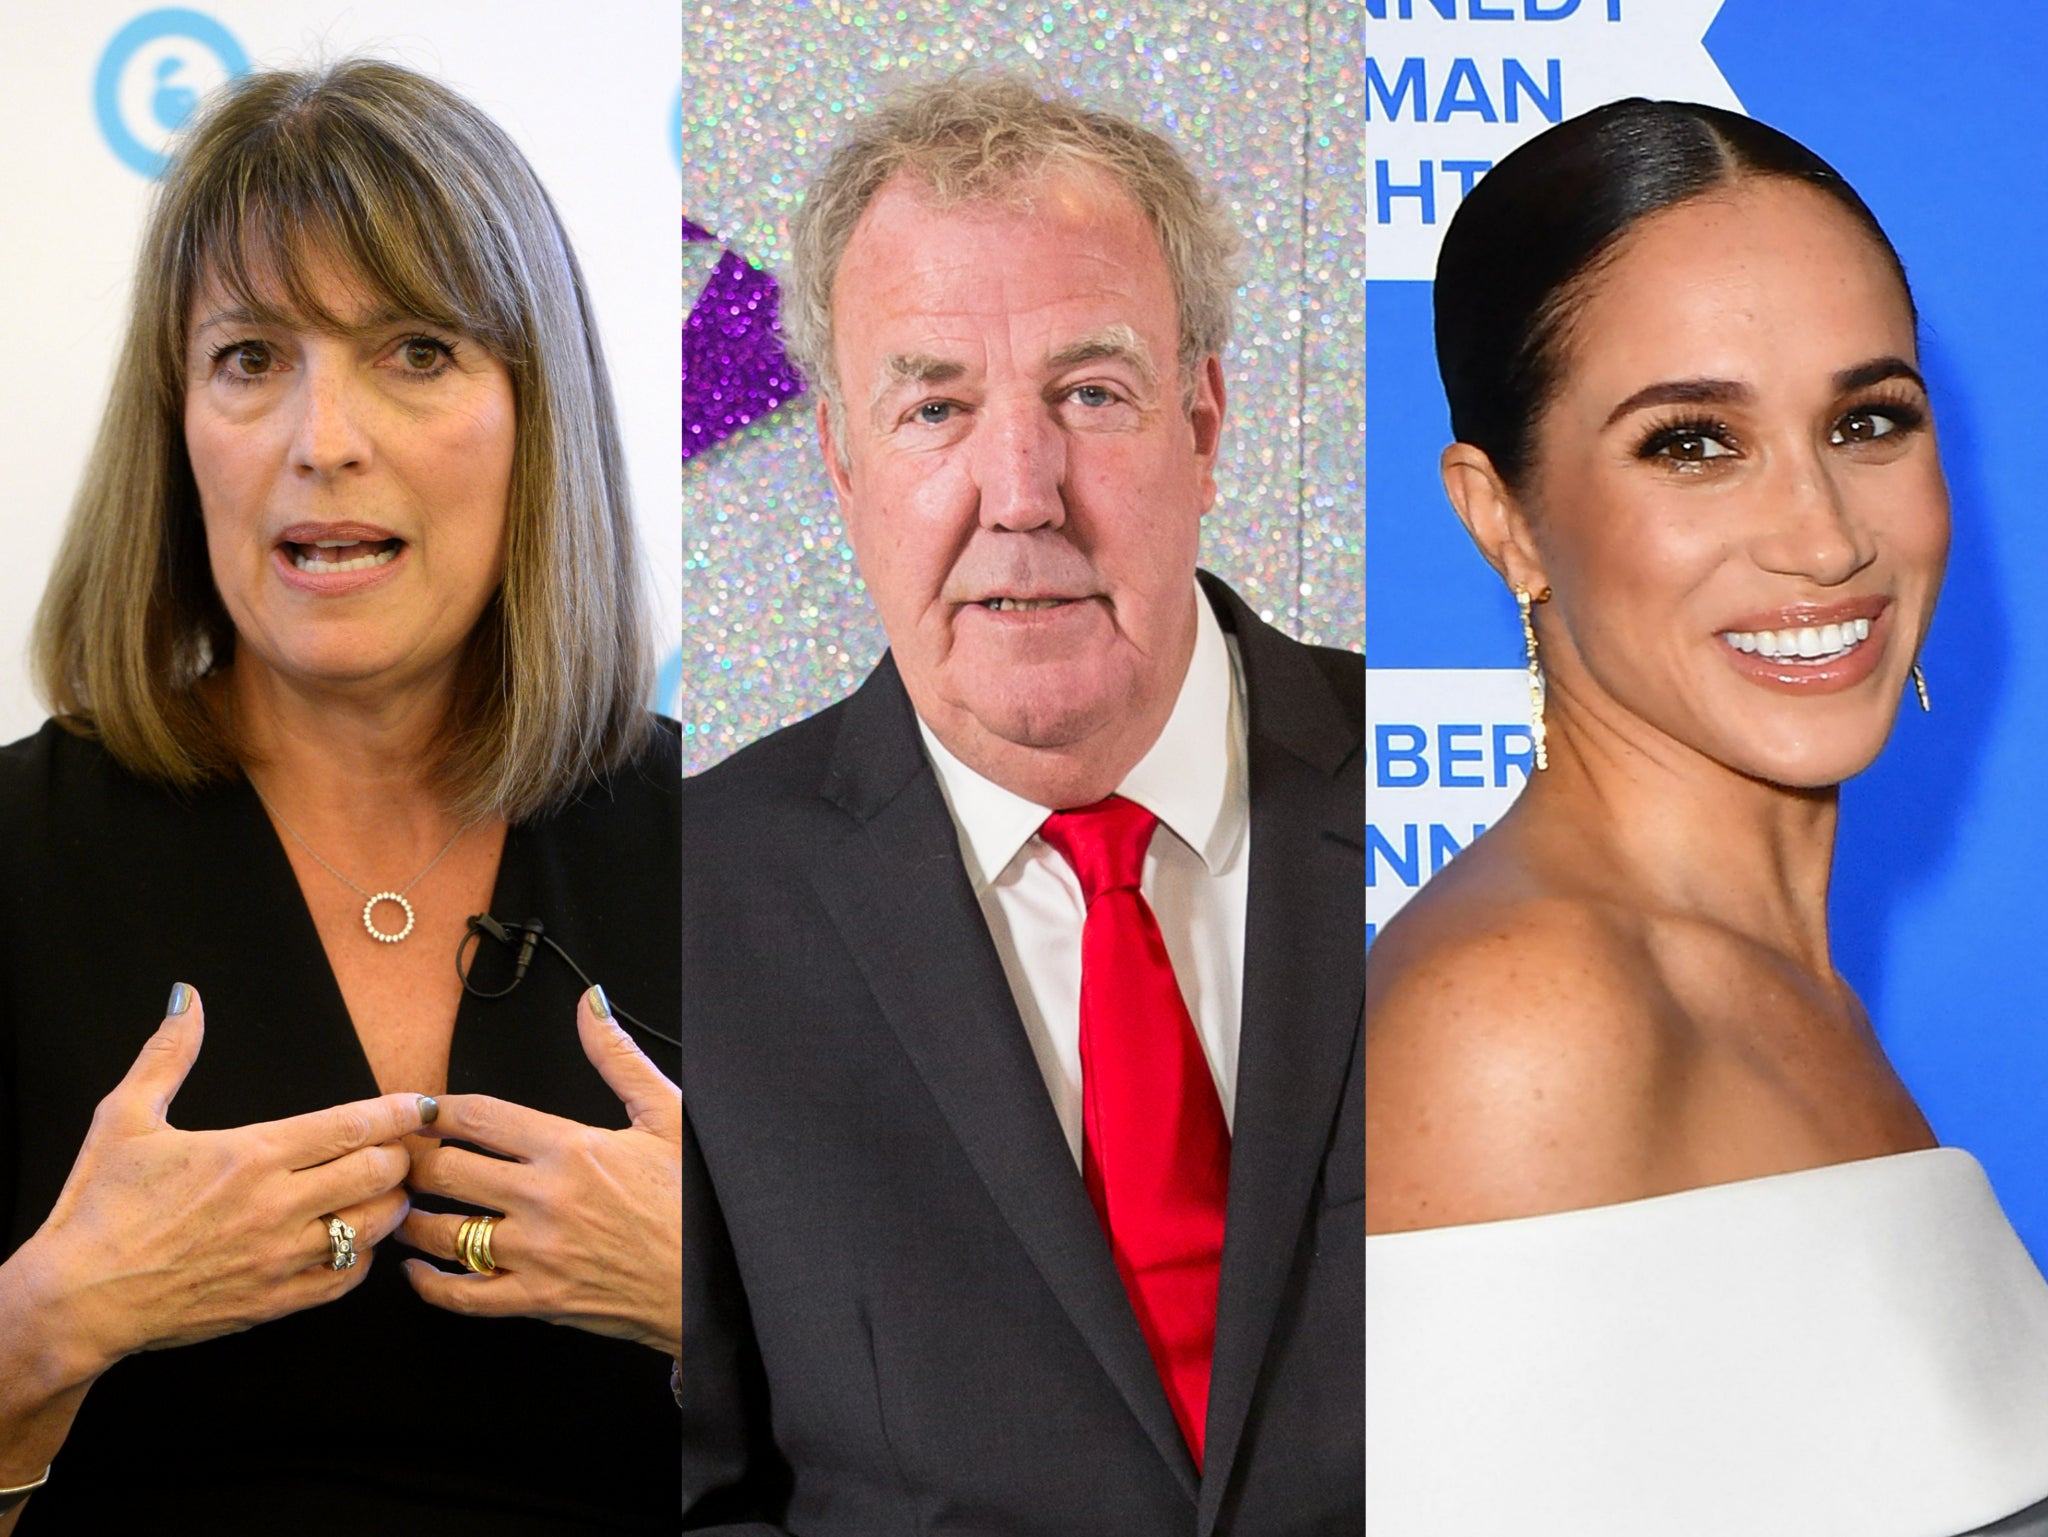 ITV’s chief executive Carolyn McCall, Jeremy Clarkson and Meghan Markle